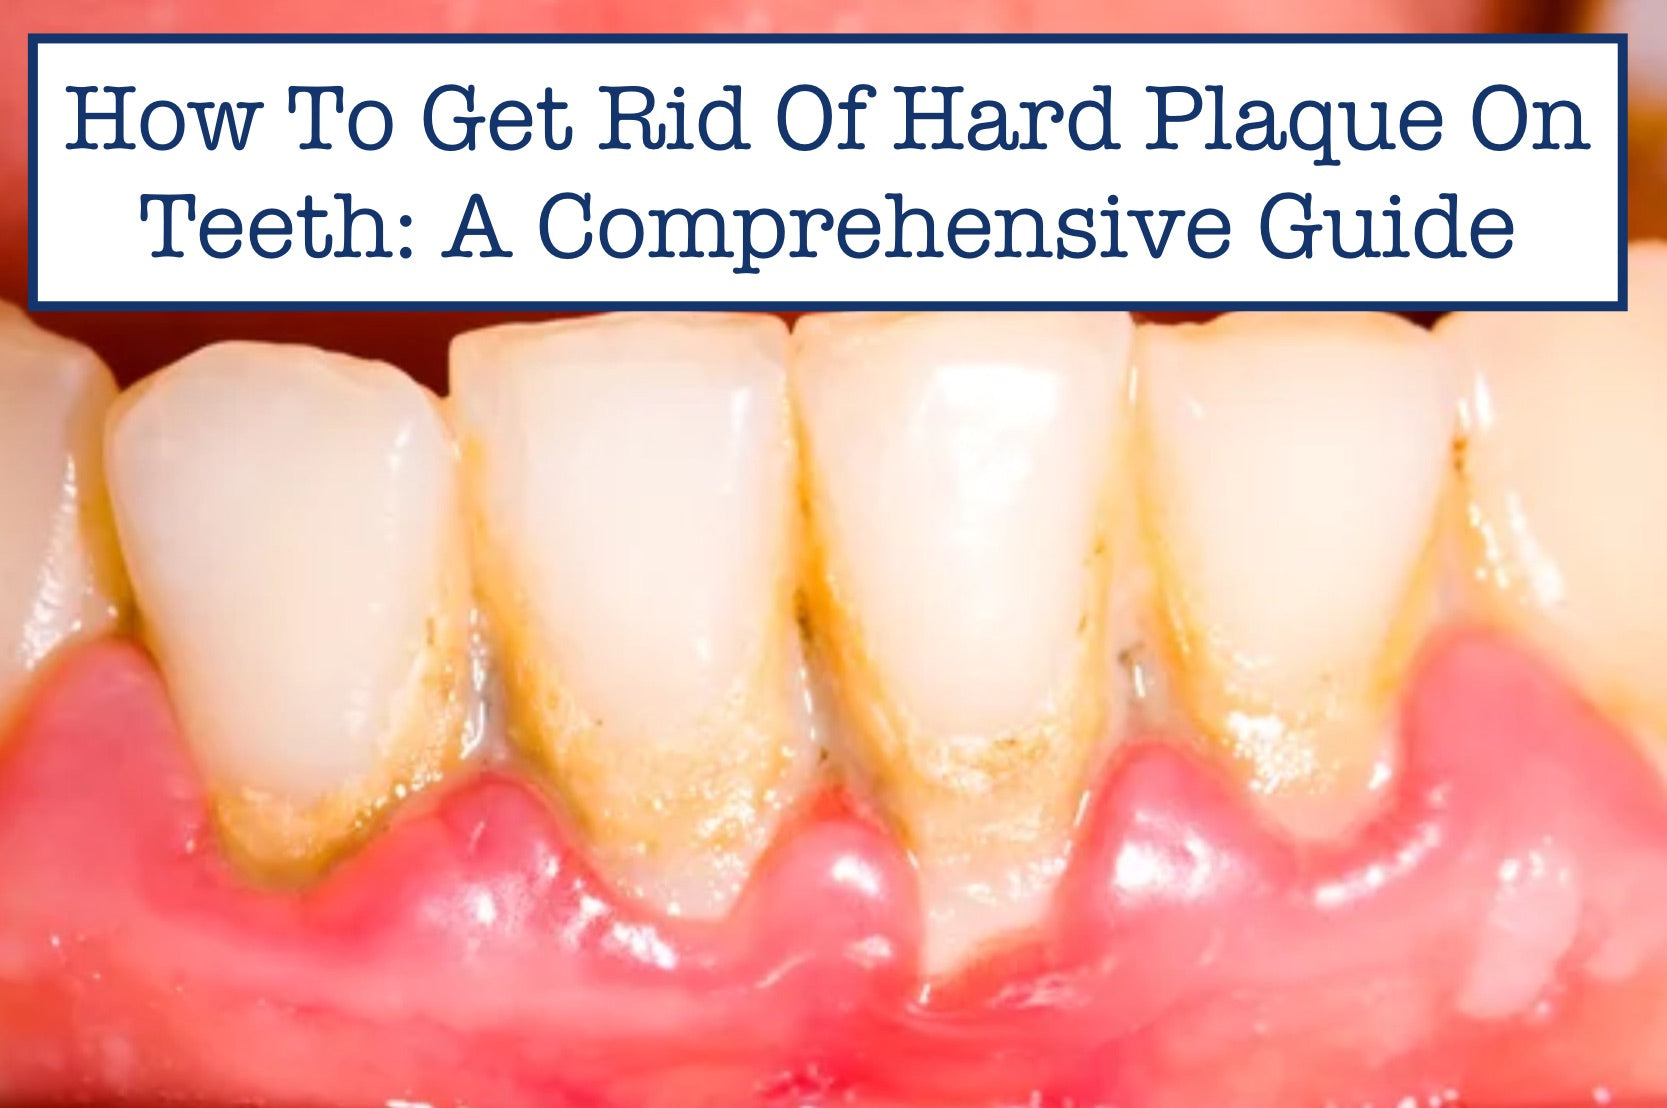 How To Get Rid Of Hard Plaque On Teeth: A Comprehensive Guide